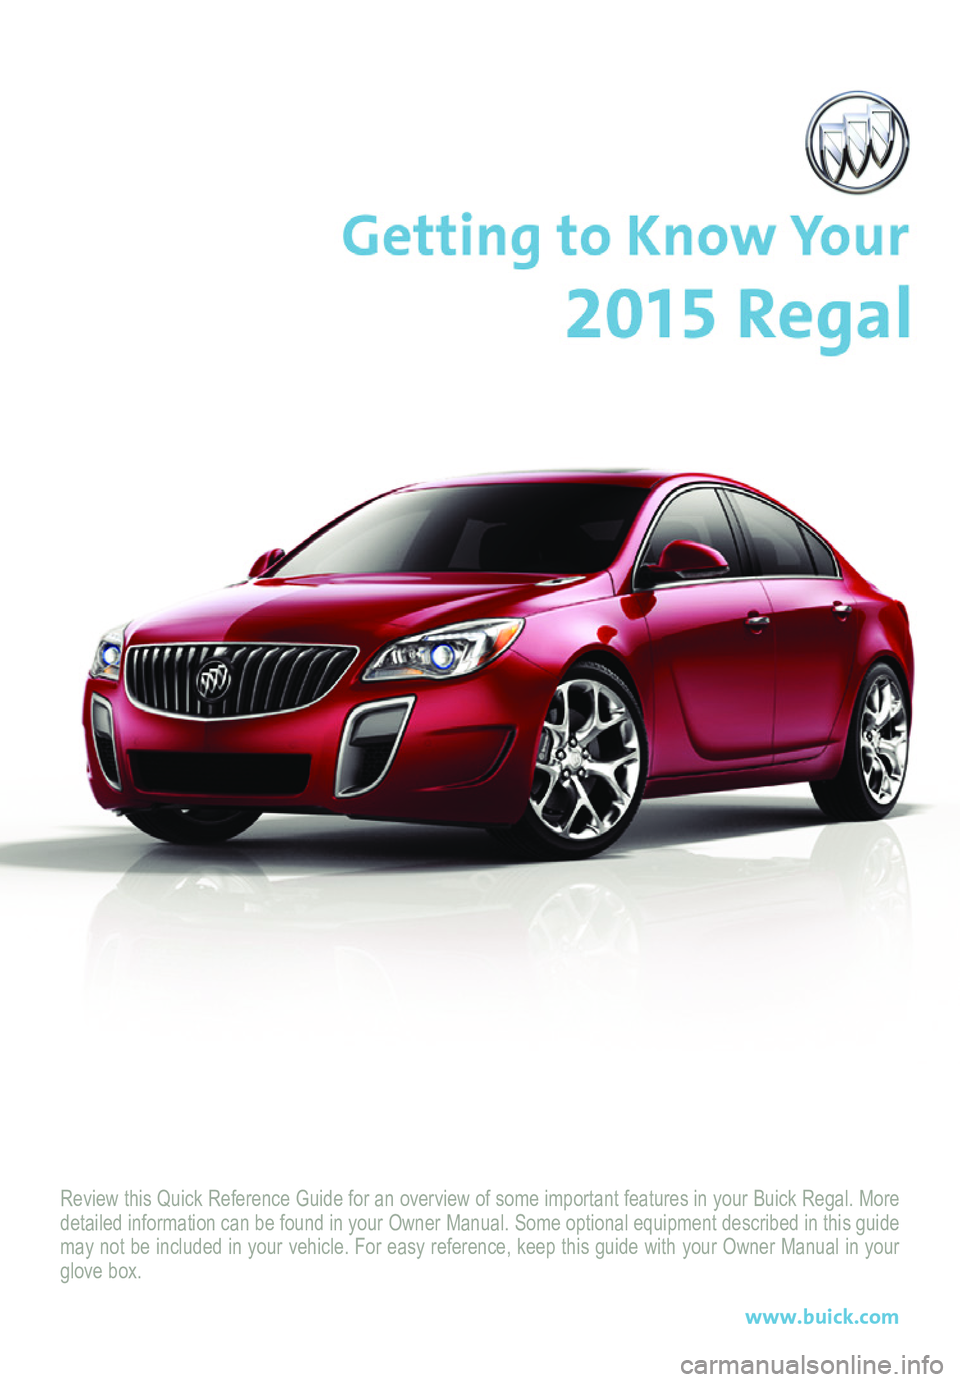 BUICK REGAL 2015  Get To Know Guide Review this Quick Reference Guide for an overview of some important feat\
ures in your Buick Regal. More detailed information can be found in your Owner Manual. Some optional eq\
uipment described in 